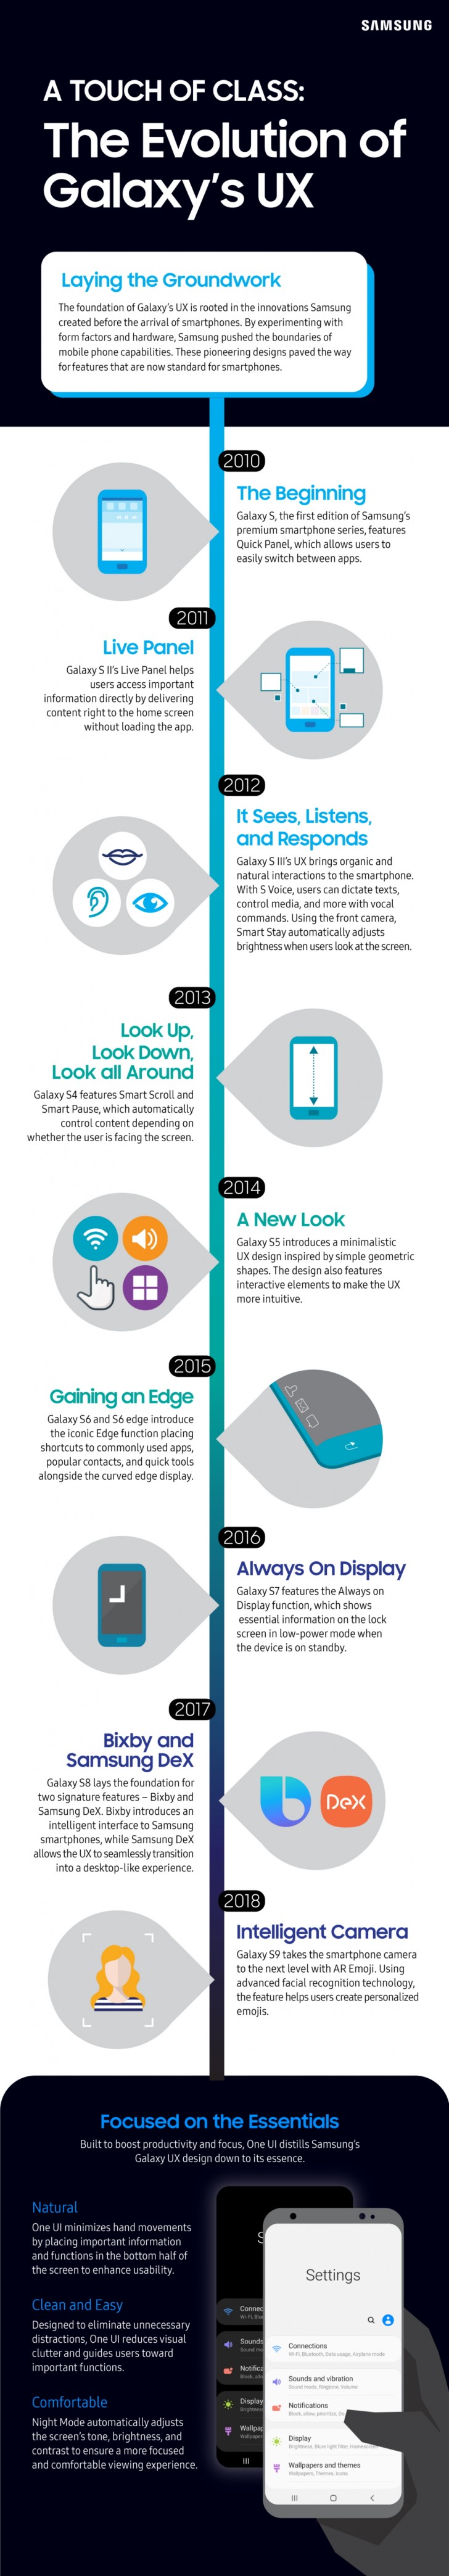 Infographic: the interface novelties on Galaxy S phones that led to One UI